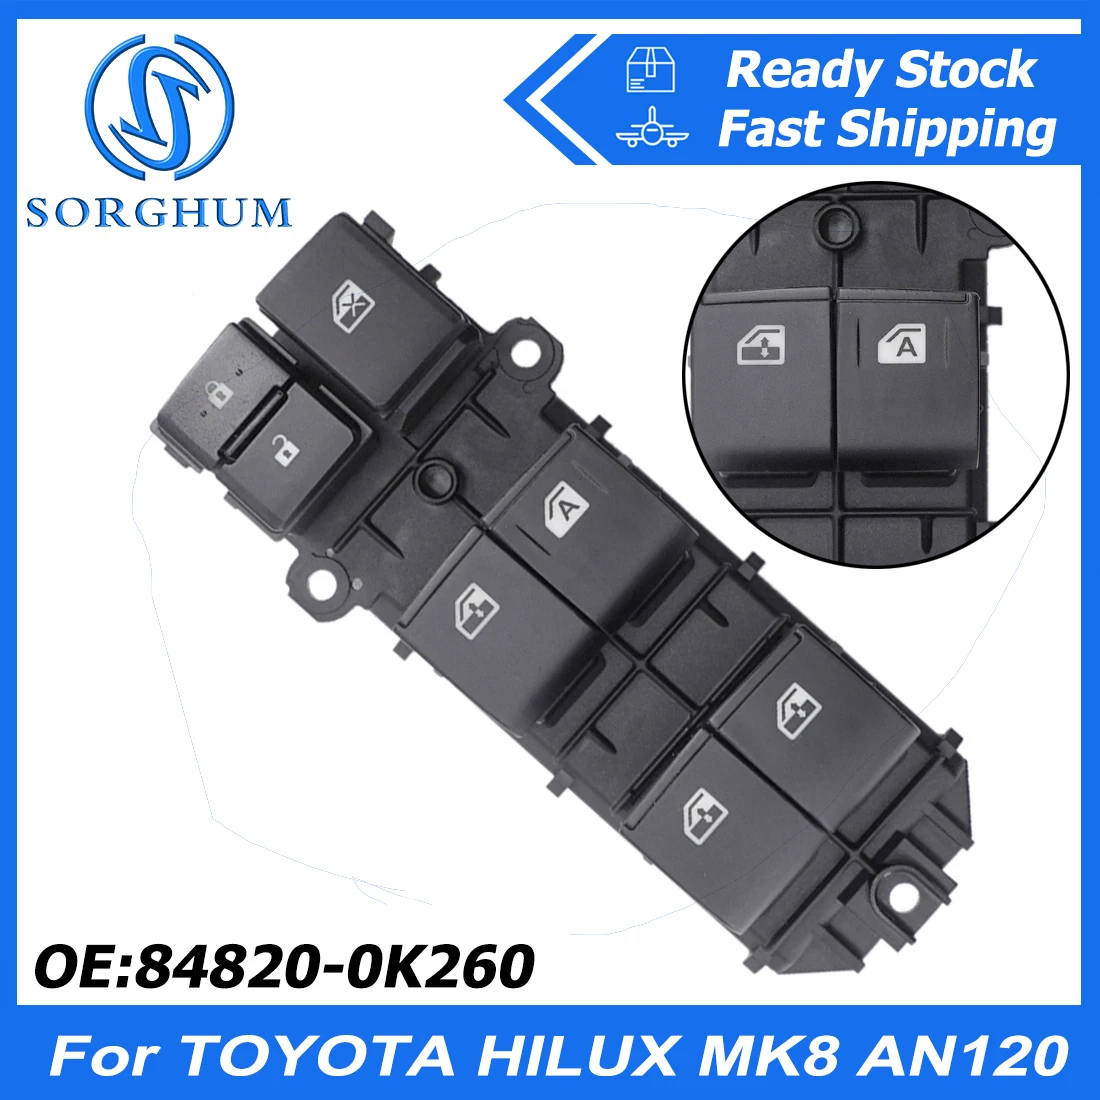 

SORGHUM For TOYOTA HILUX MK8 AN120 2017 Front Right Door Power Window Switch Lifter Control Regulator 84820-0K260 RHD Driver